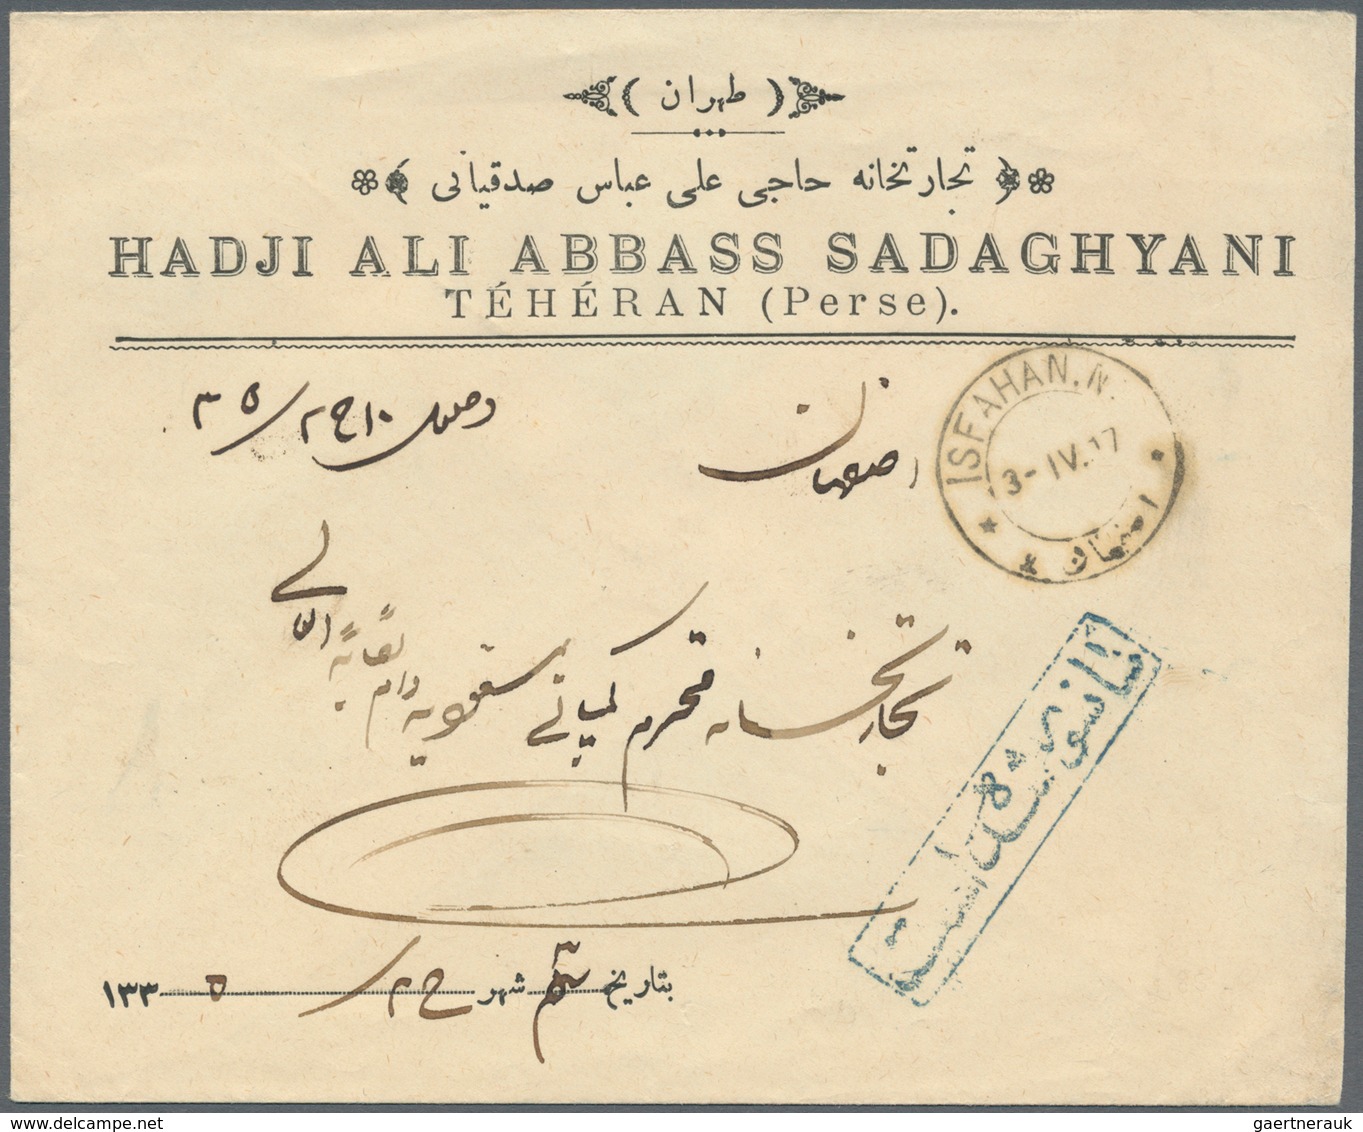 Iran: 1916-17, Two Covers With Censors, One Russian, Cancelled Hamadan And Tehran, Fine Pair - Iran